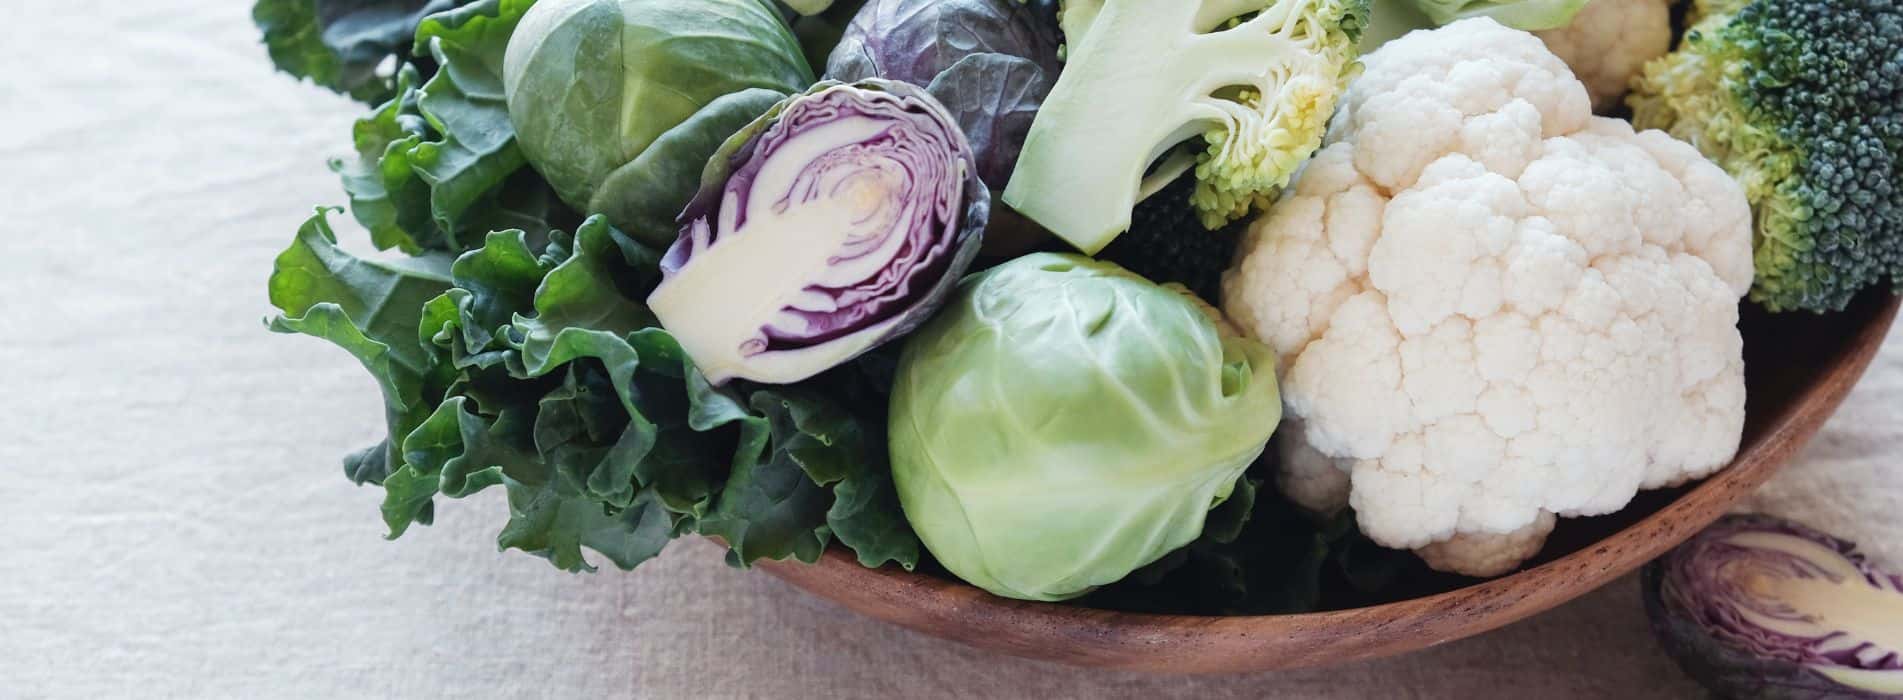 Cruciferous vegetables for weight loss